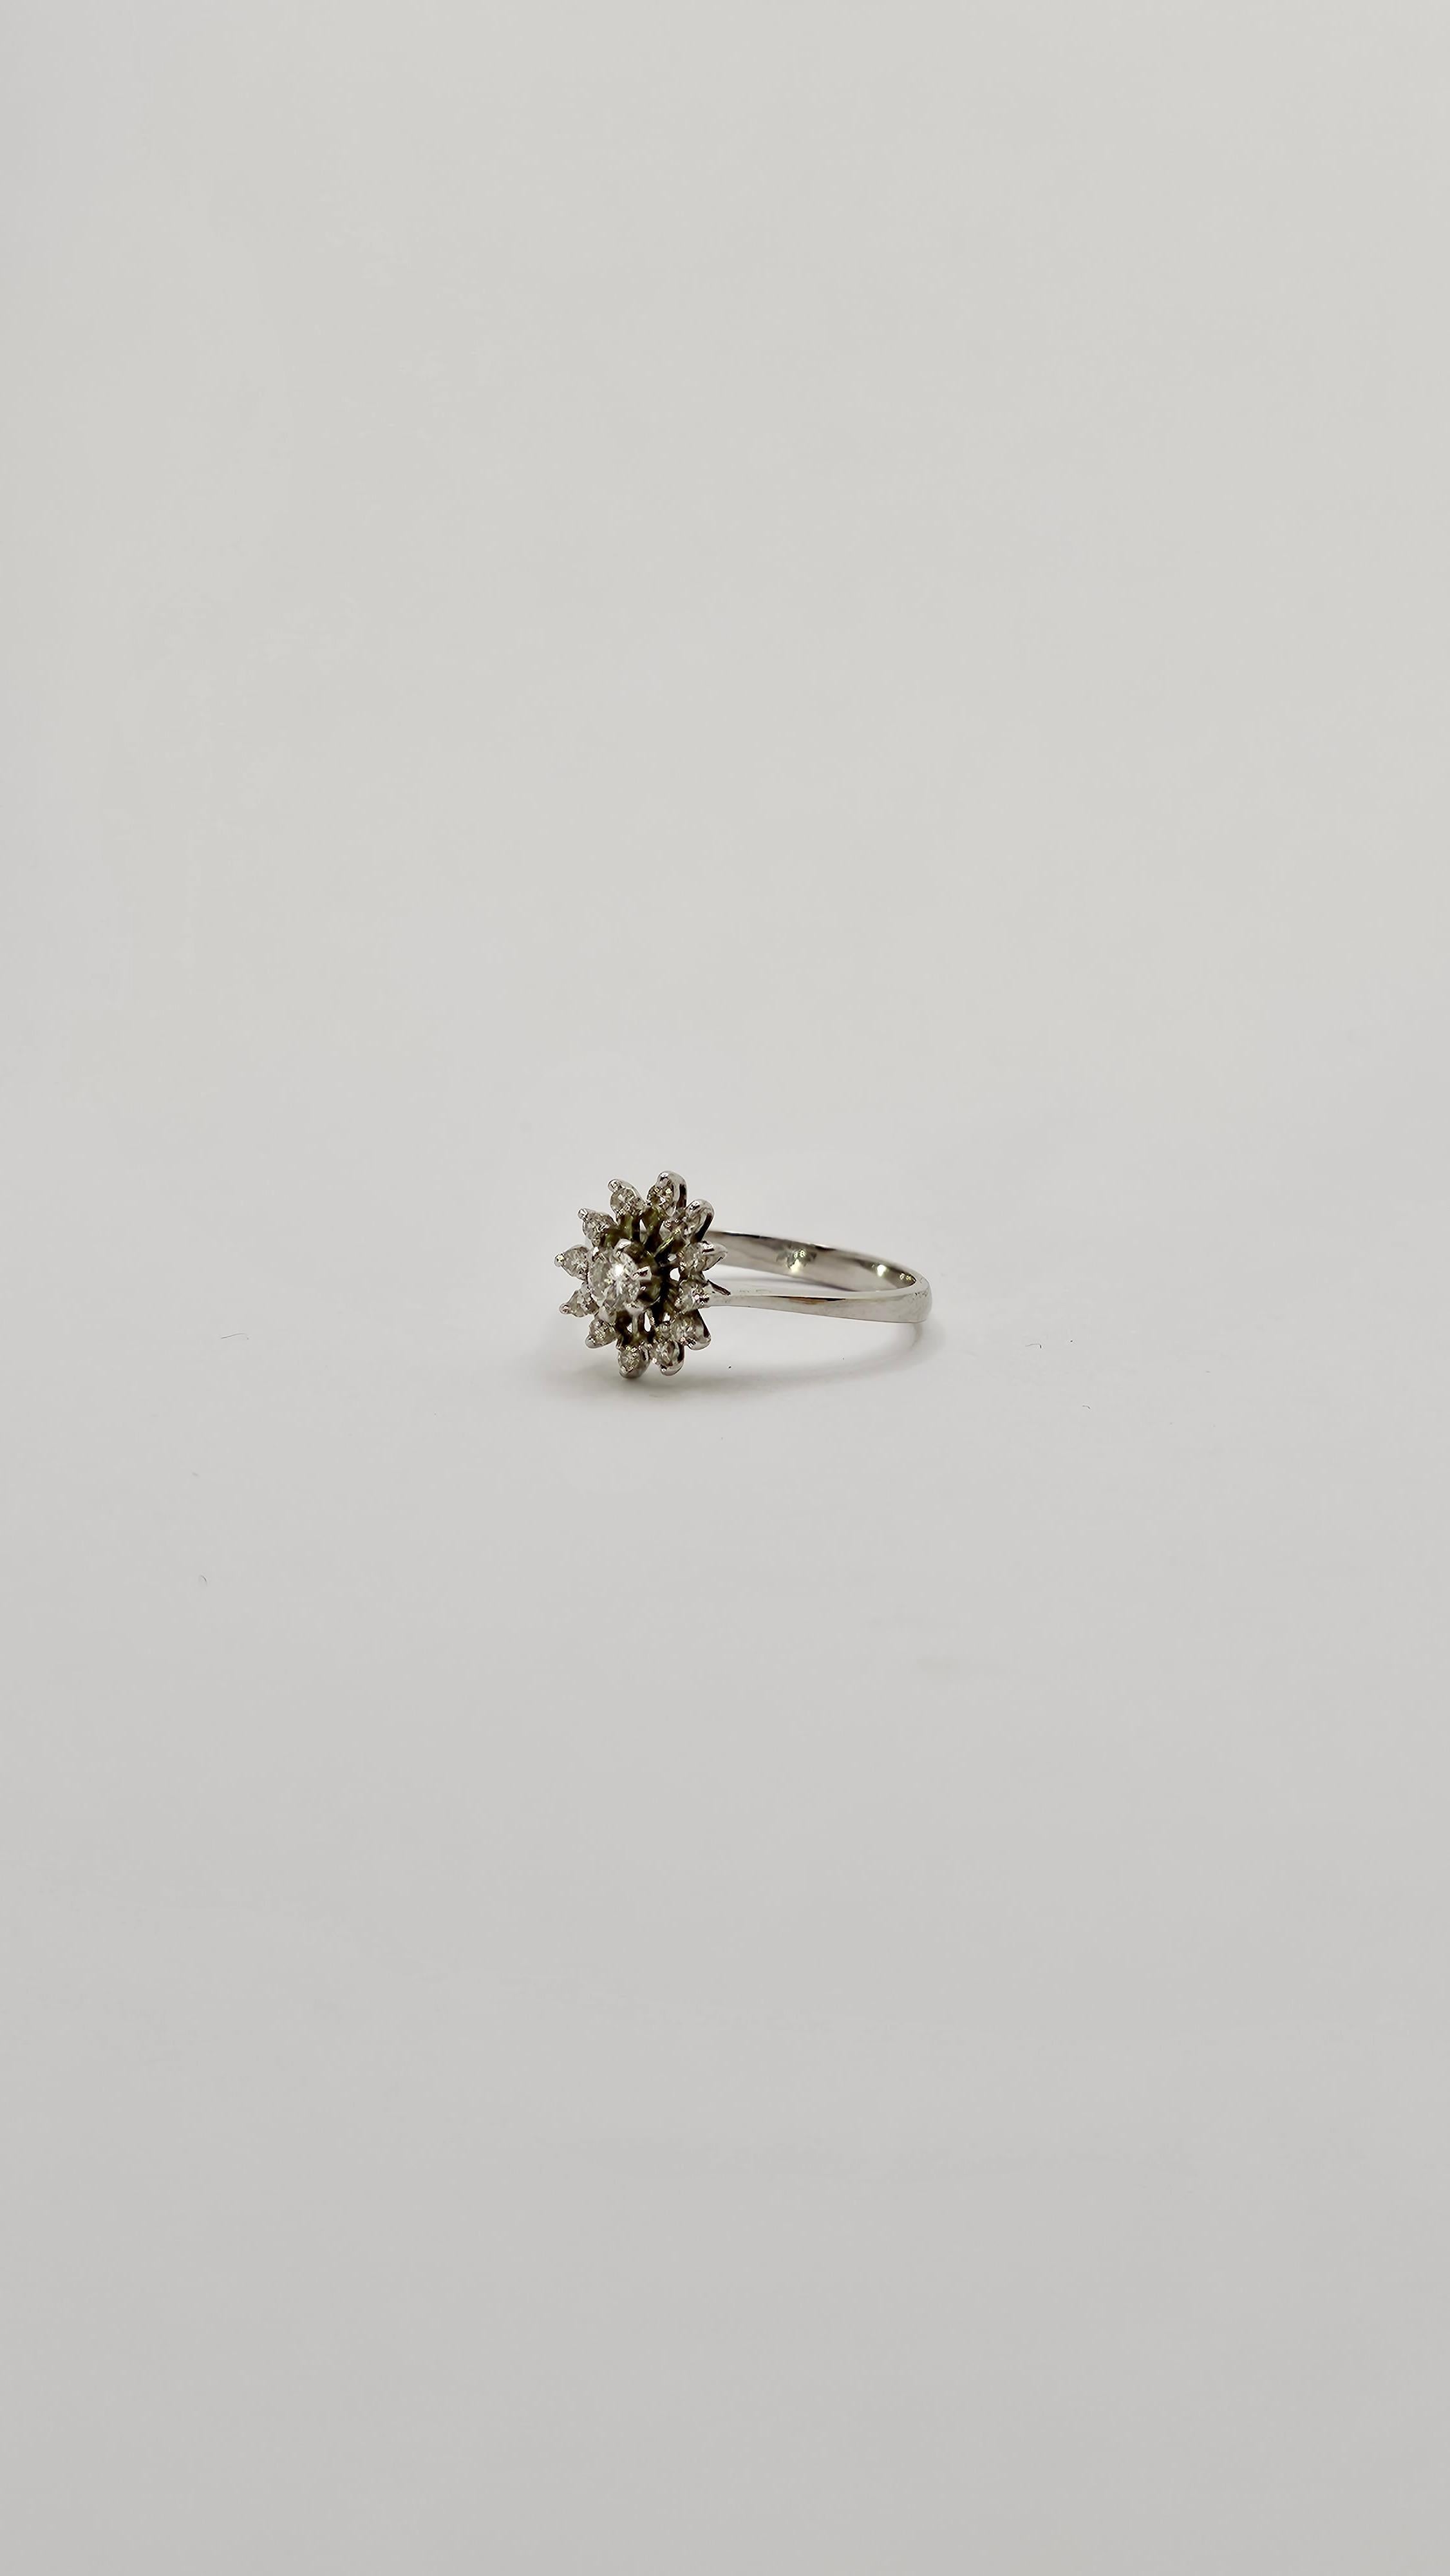 Art Nouveau 1960s Vintage Ring in White Gold and Diamonds